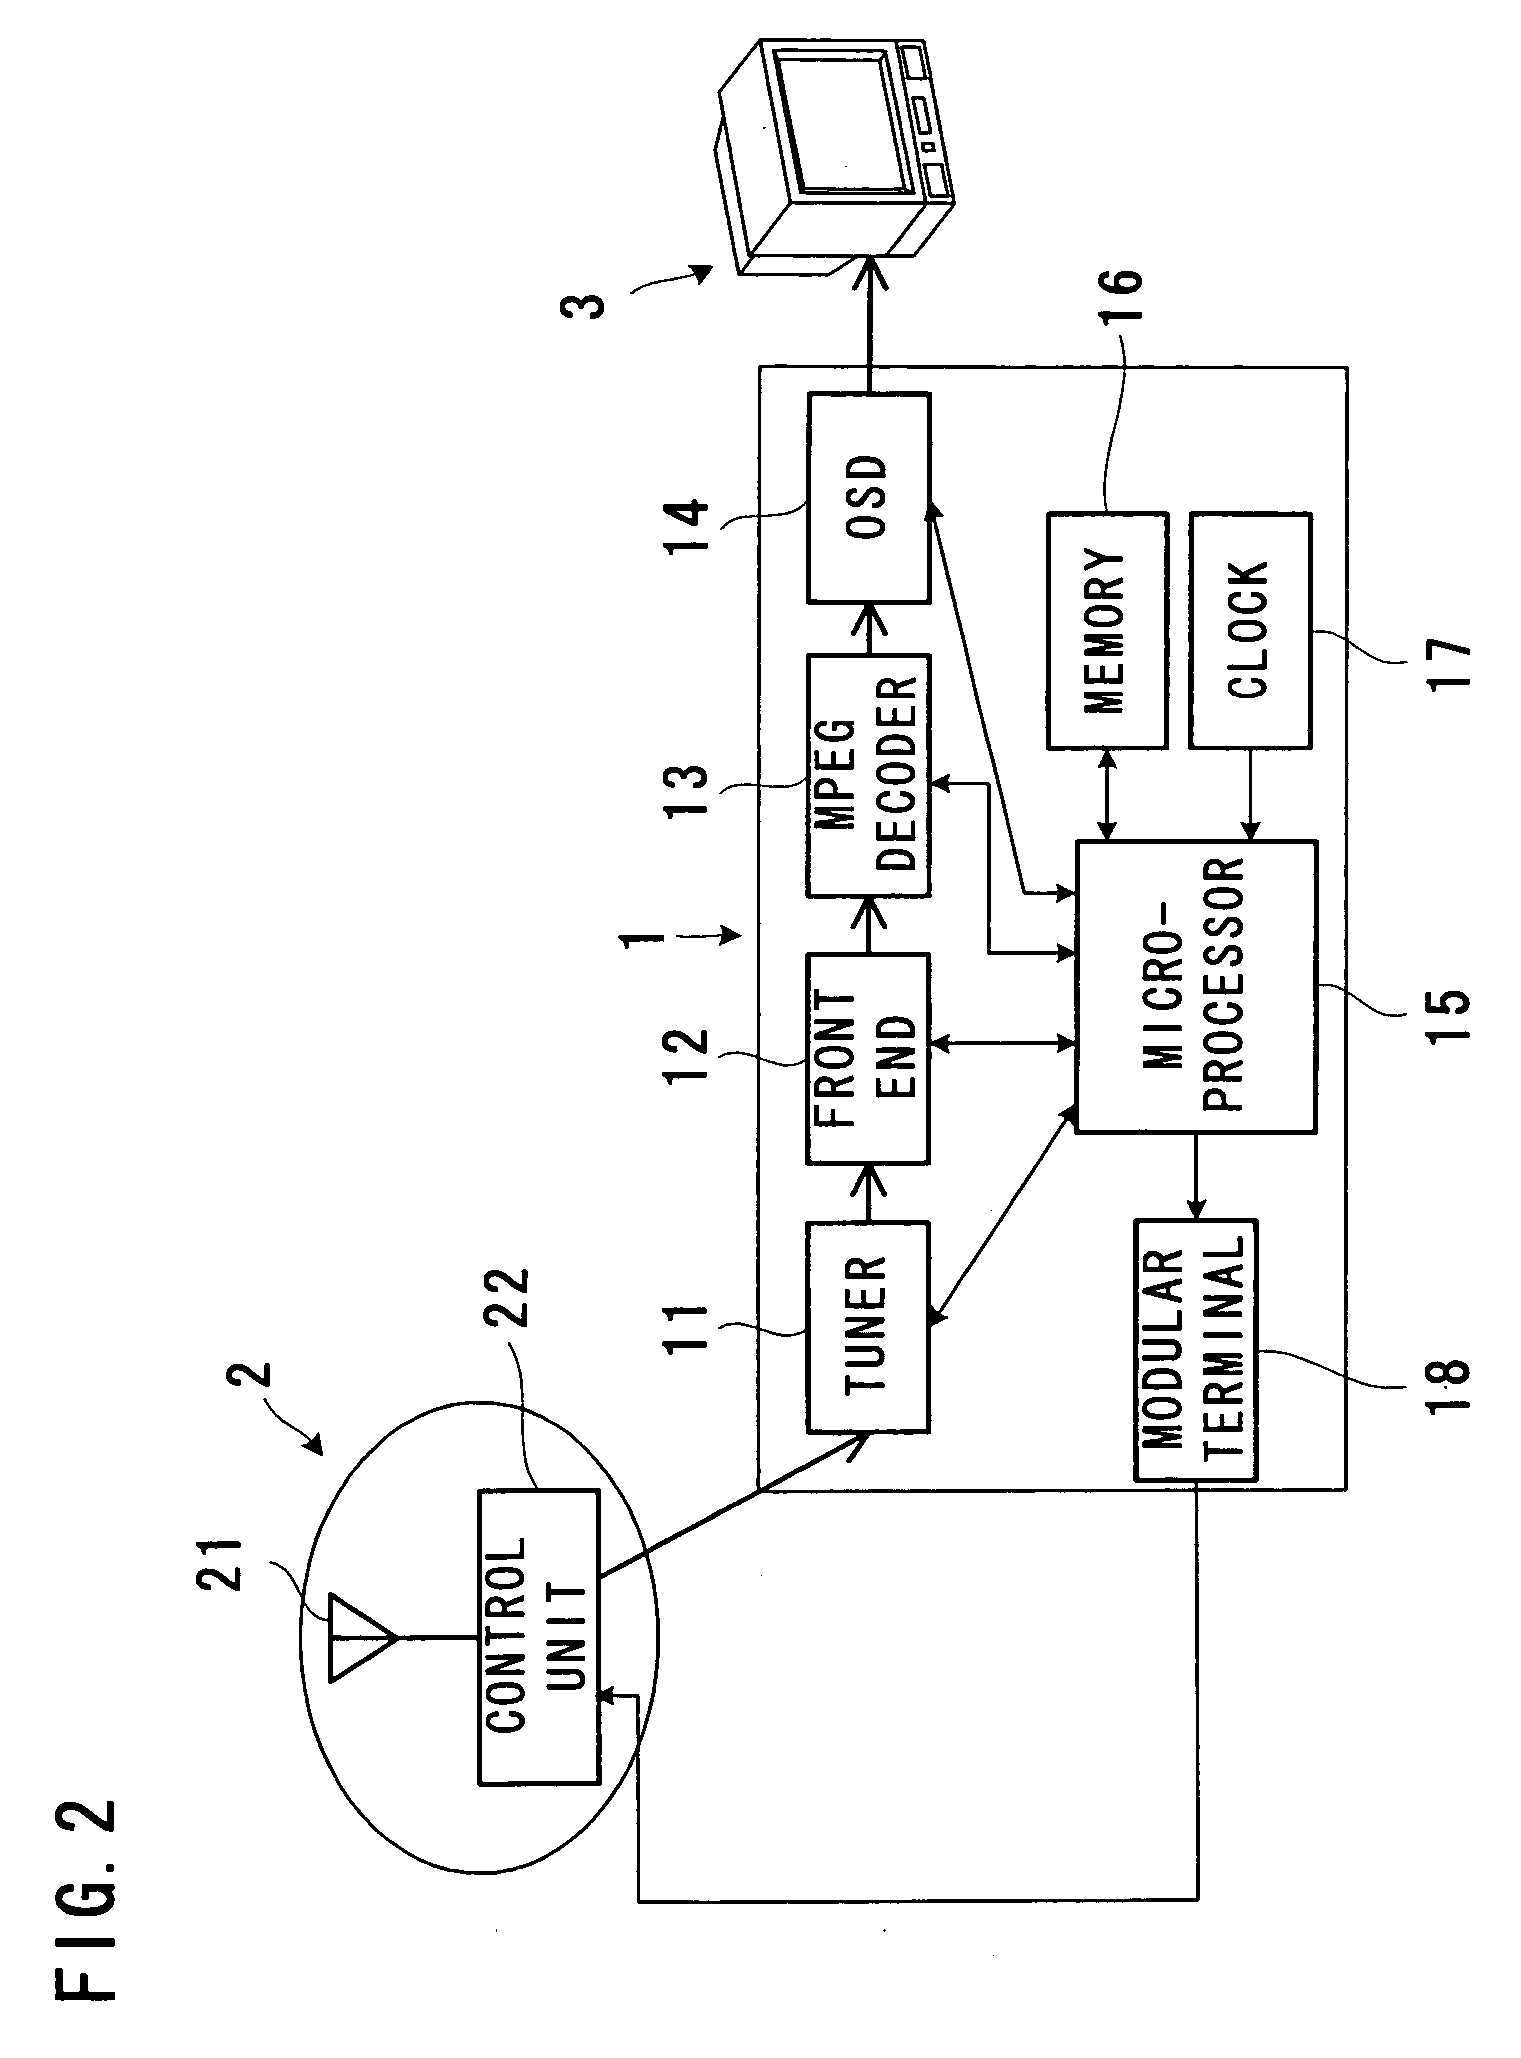 Television broadcast receiver